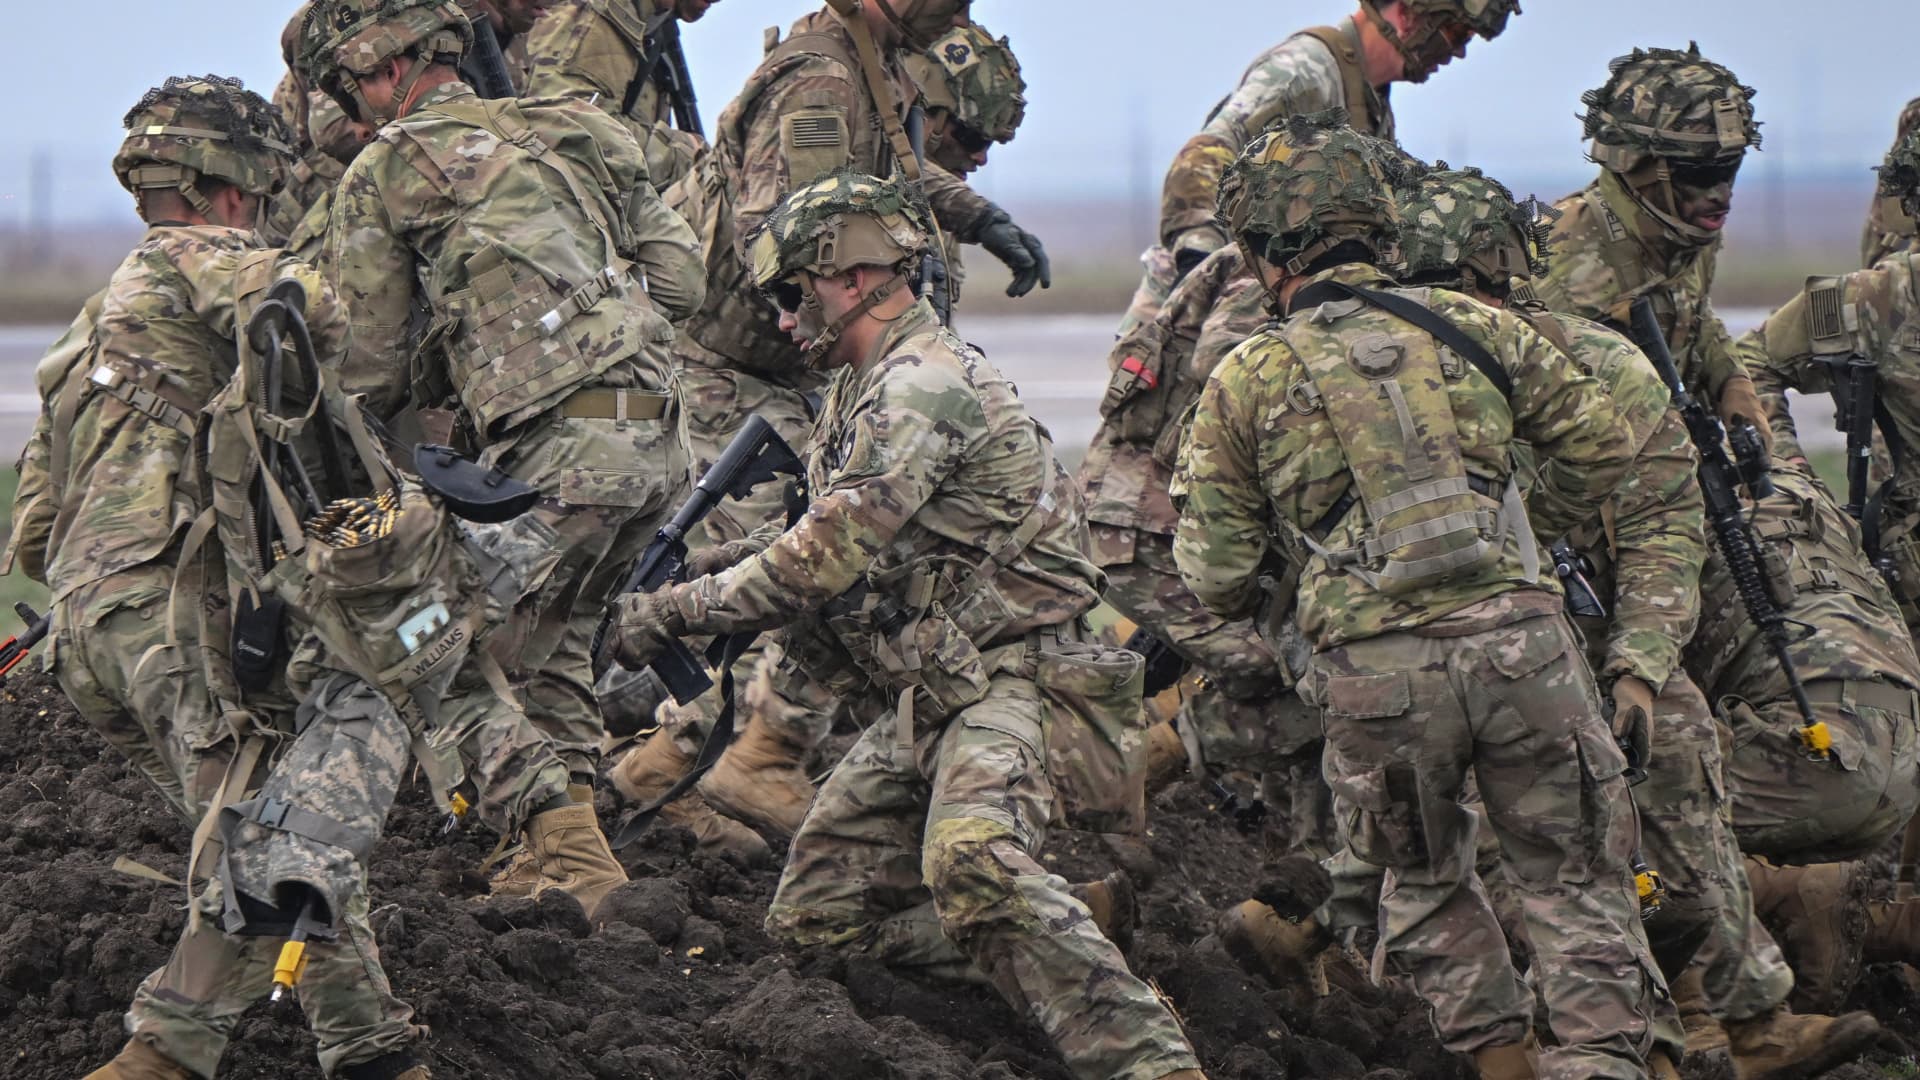 Soldiers take part in a demonstration of the US Army 101 Airborne division during the brigade rotation at Mihail Kogalniceanu Air Base (RoAF 57th Air Base) near Constanta, Romania on March 31, 2023.